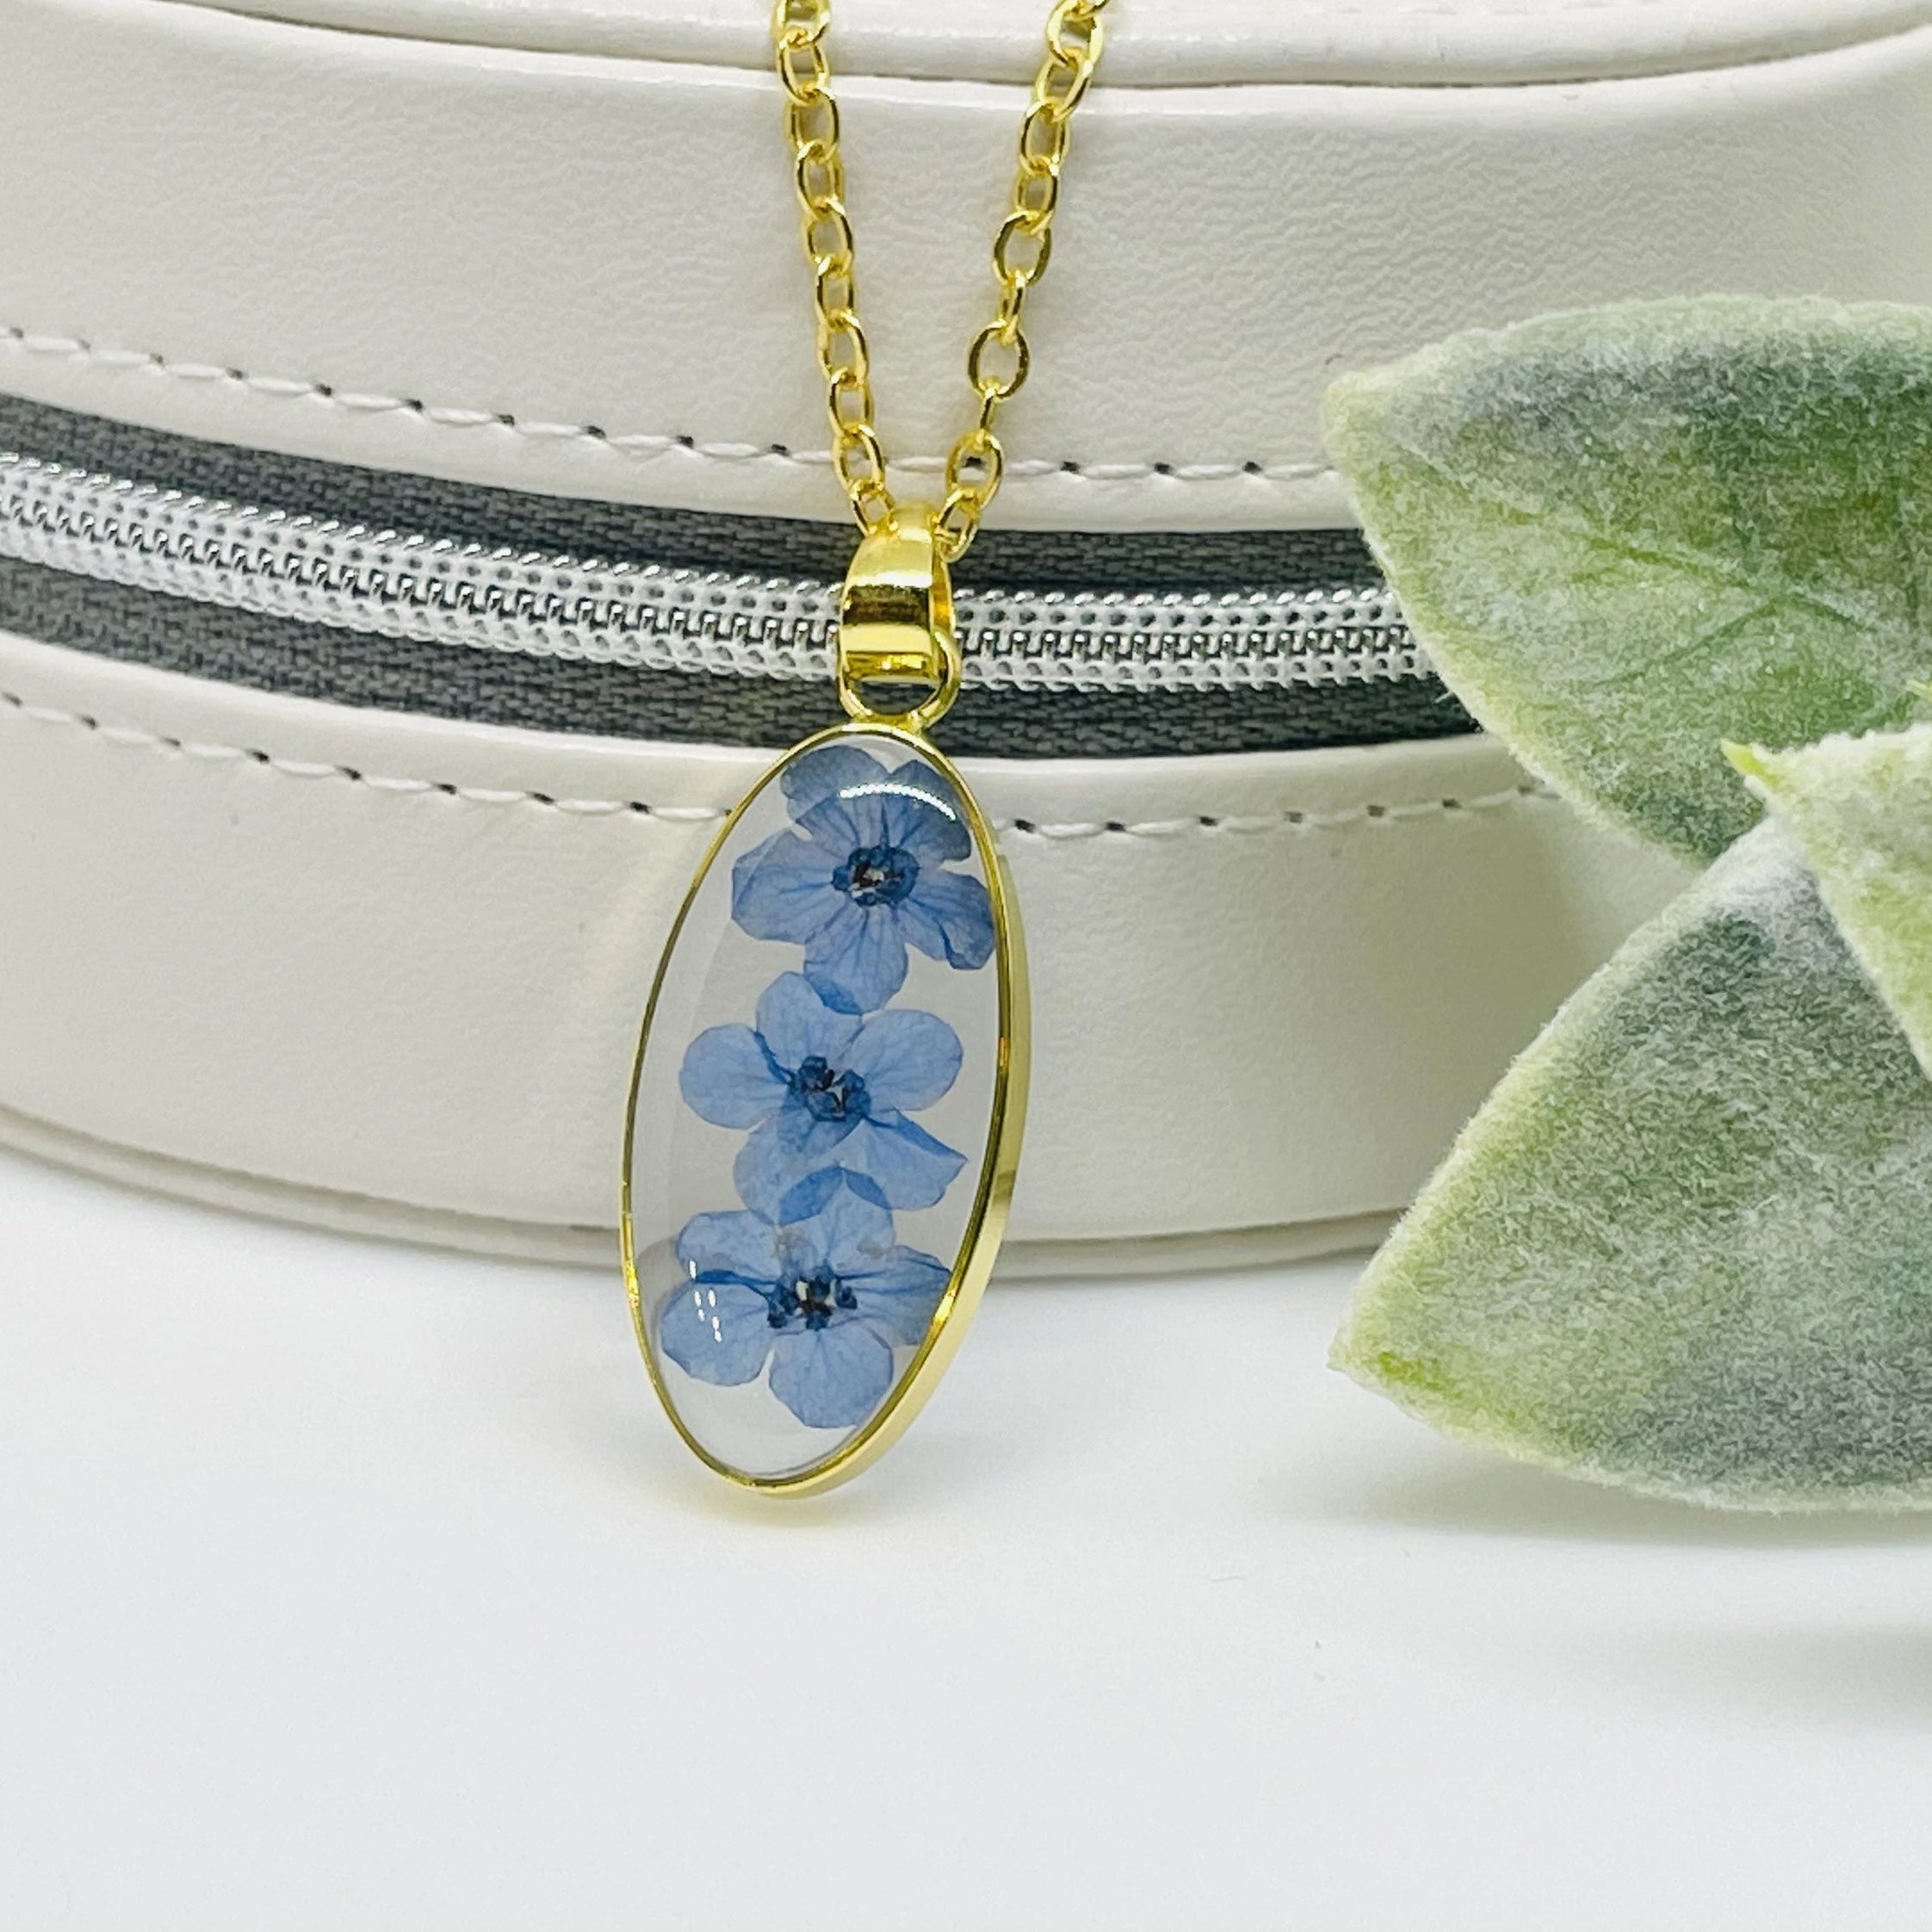 Forget Me Not Pressed Flower Necklace